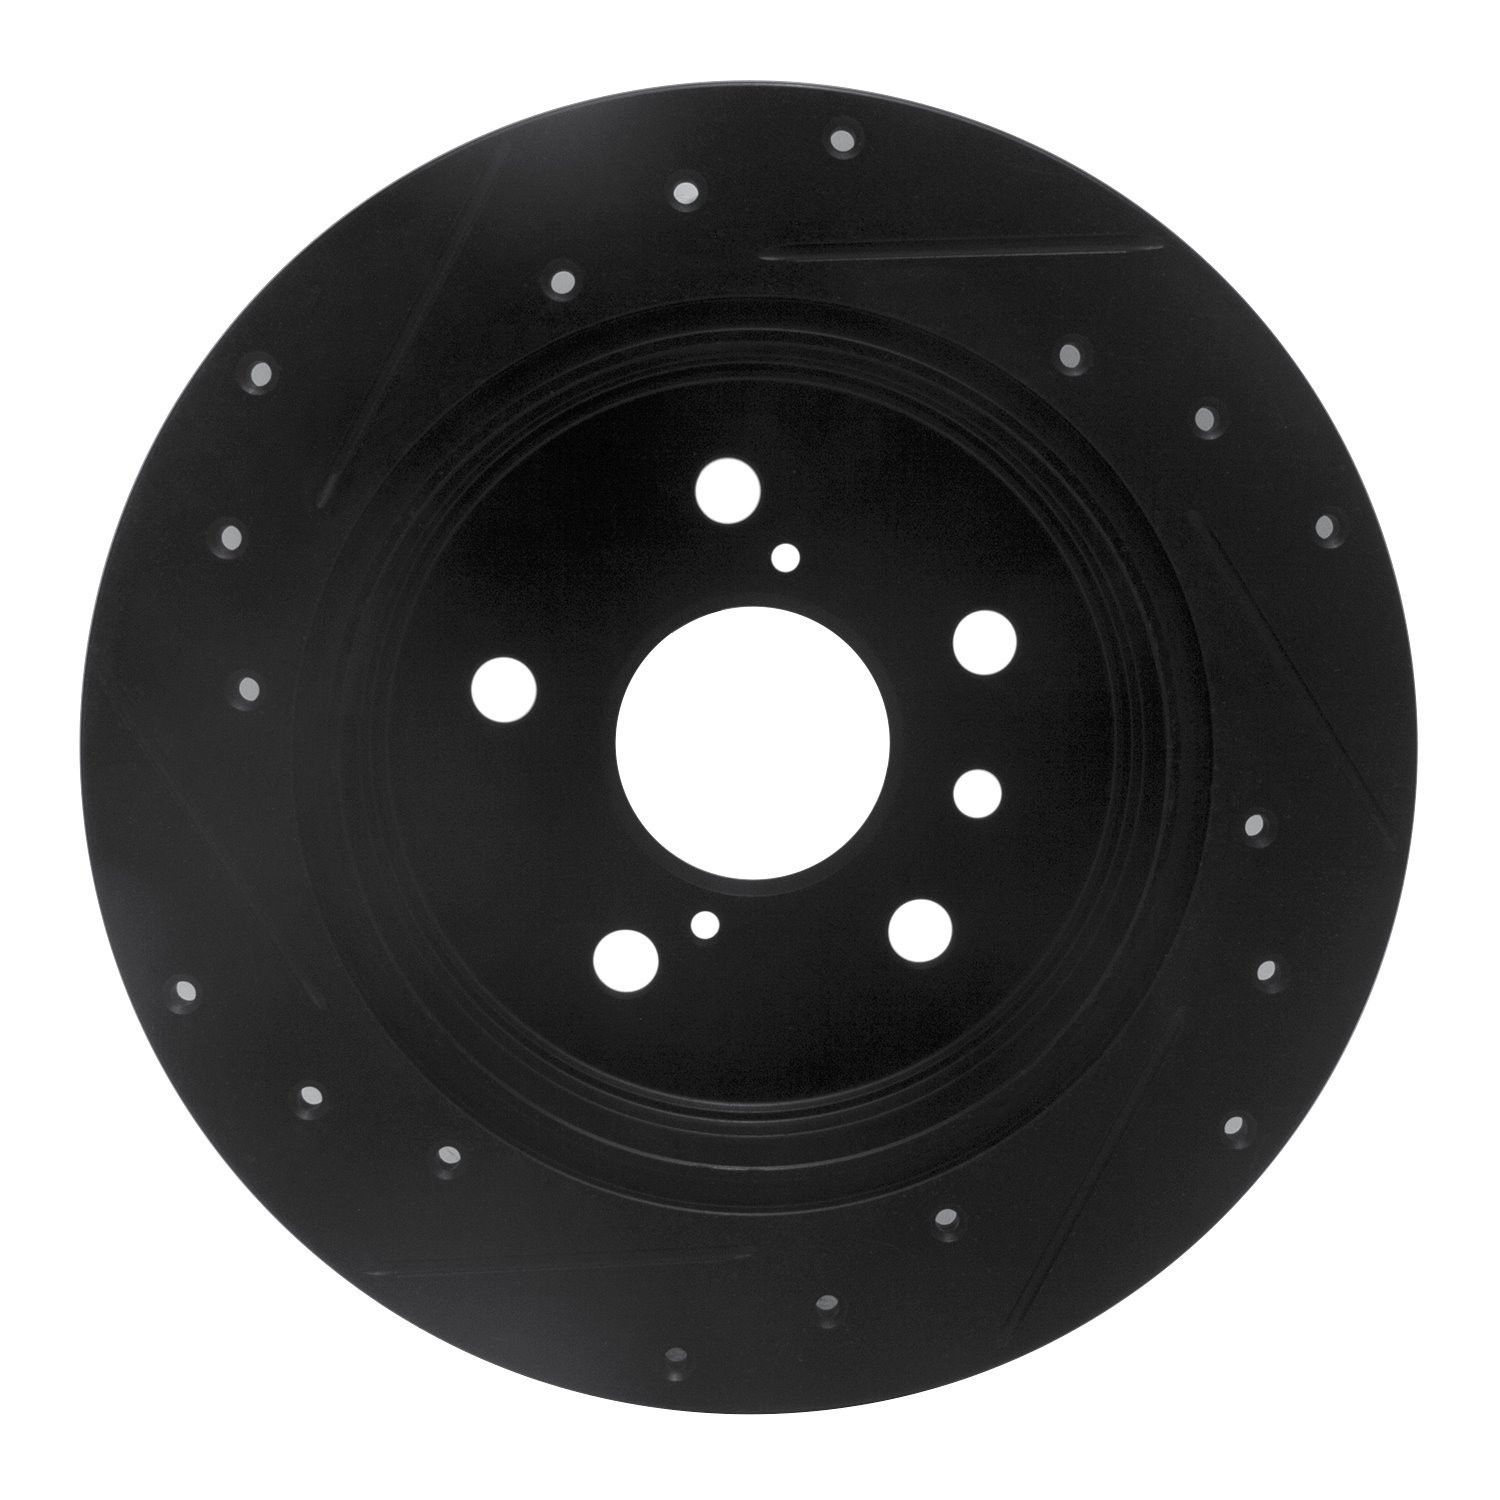 Drilled/Slotted Brake Rotor [Black], Fits Select Lexus/Toyota/Scion